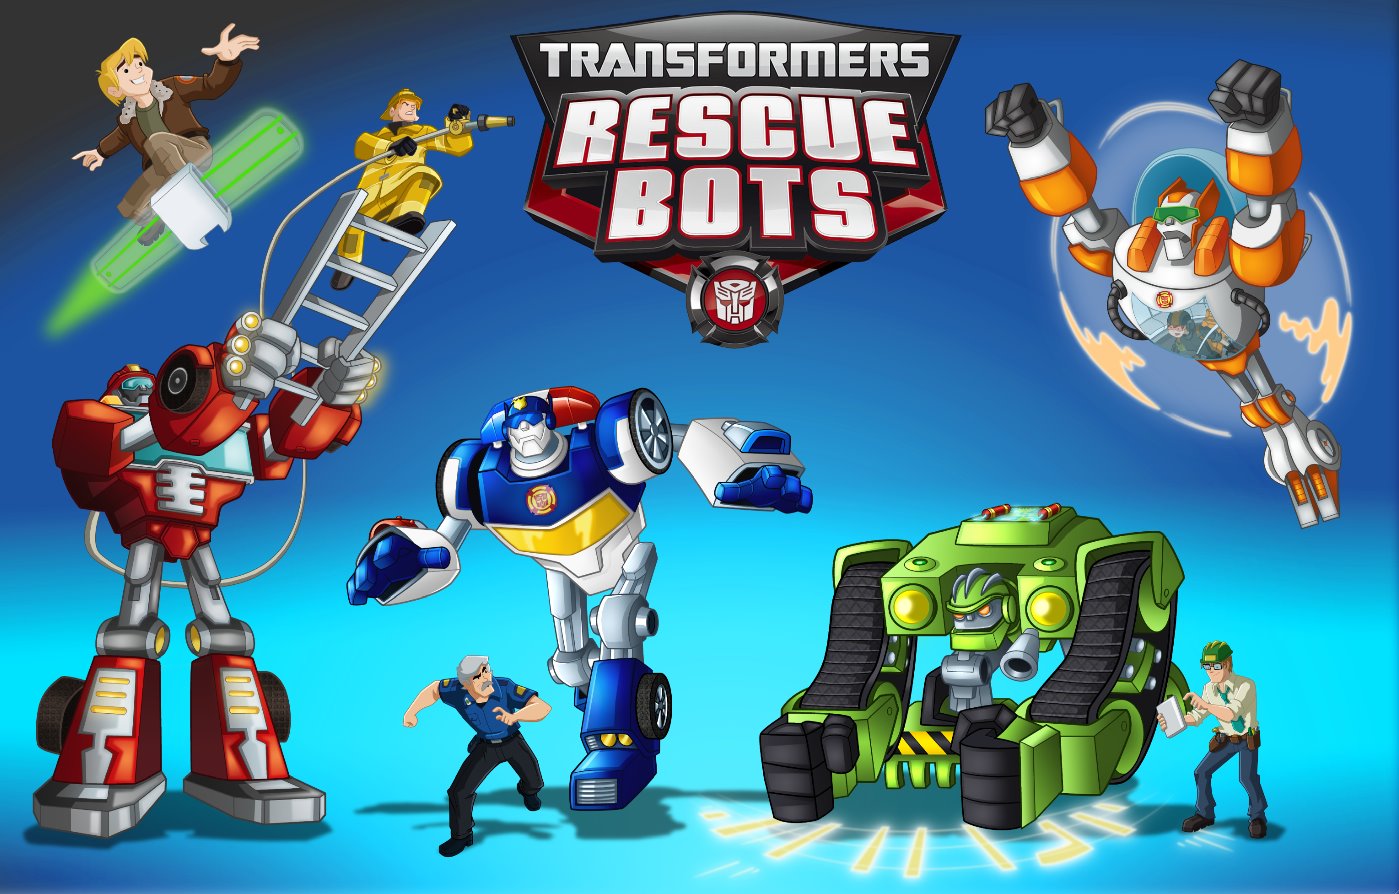 http://images3.wikia.nocookie.net/__cb20111206094606/transformers/images/1/14/Rb-promo-poster.jpg